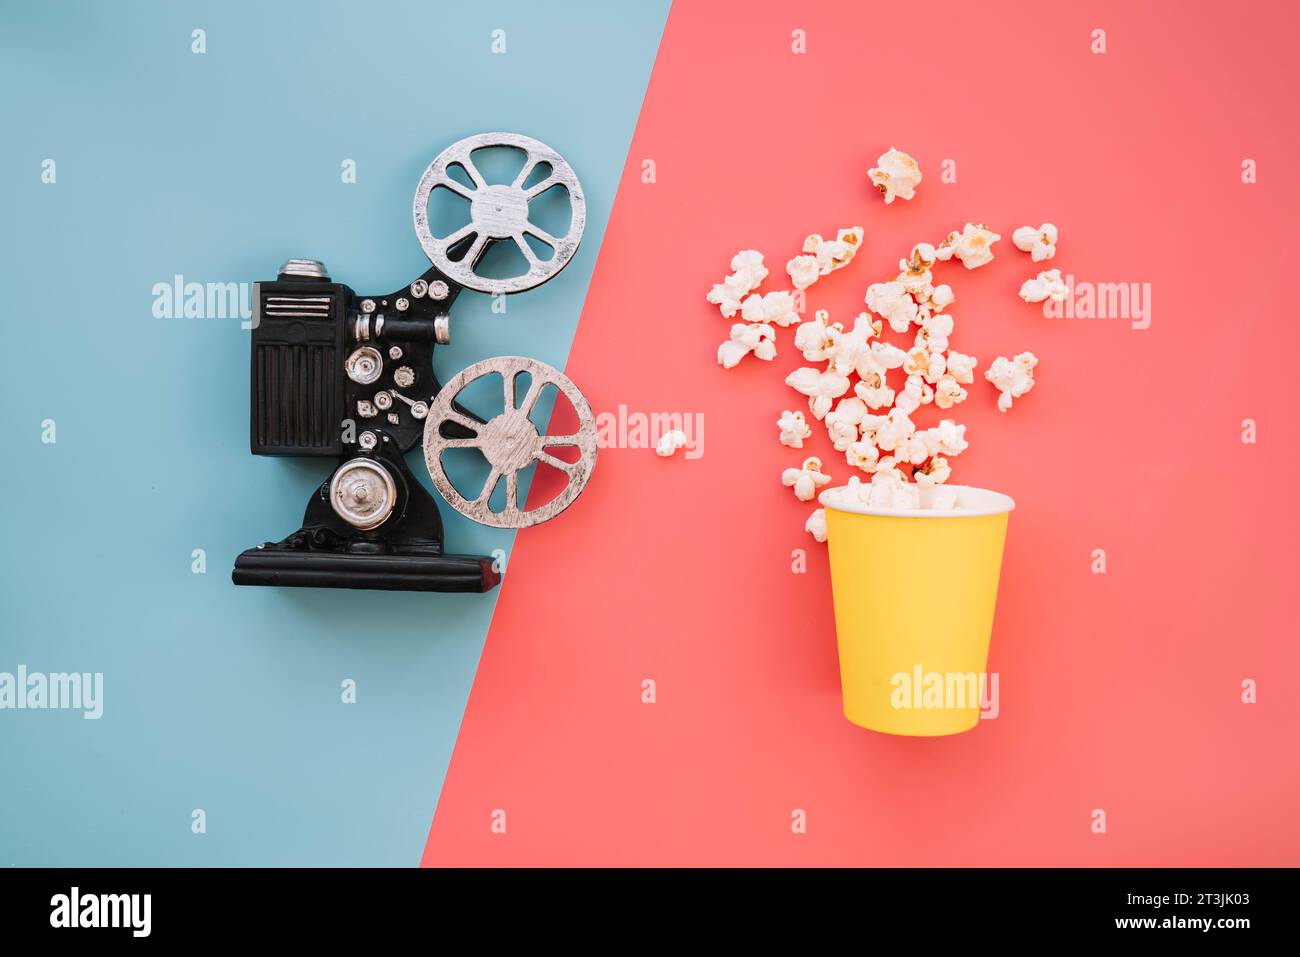 Film projector with popcorn box Stock Photo